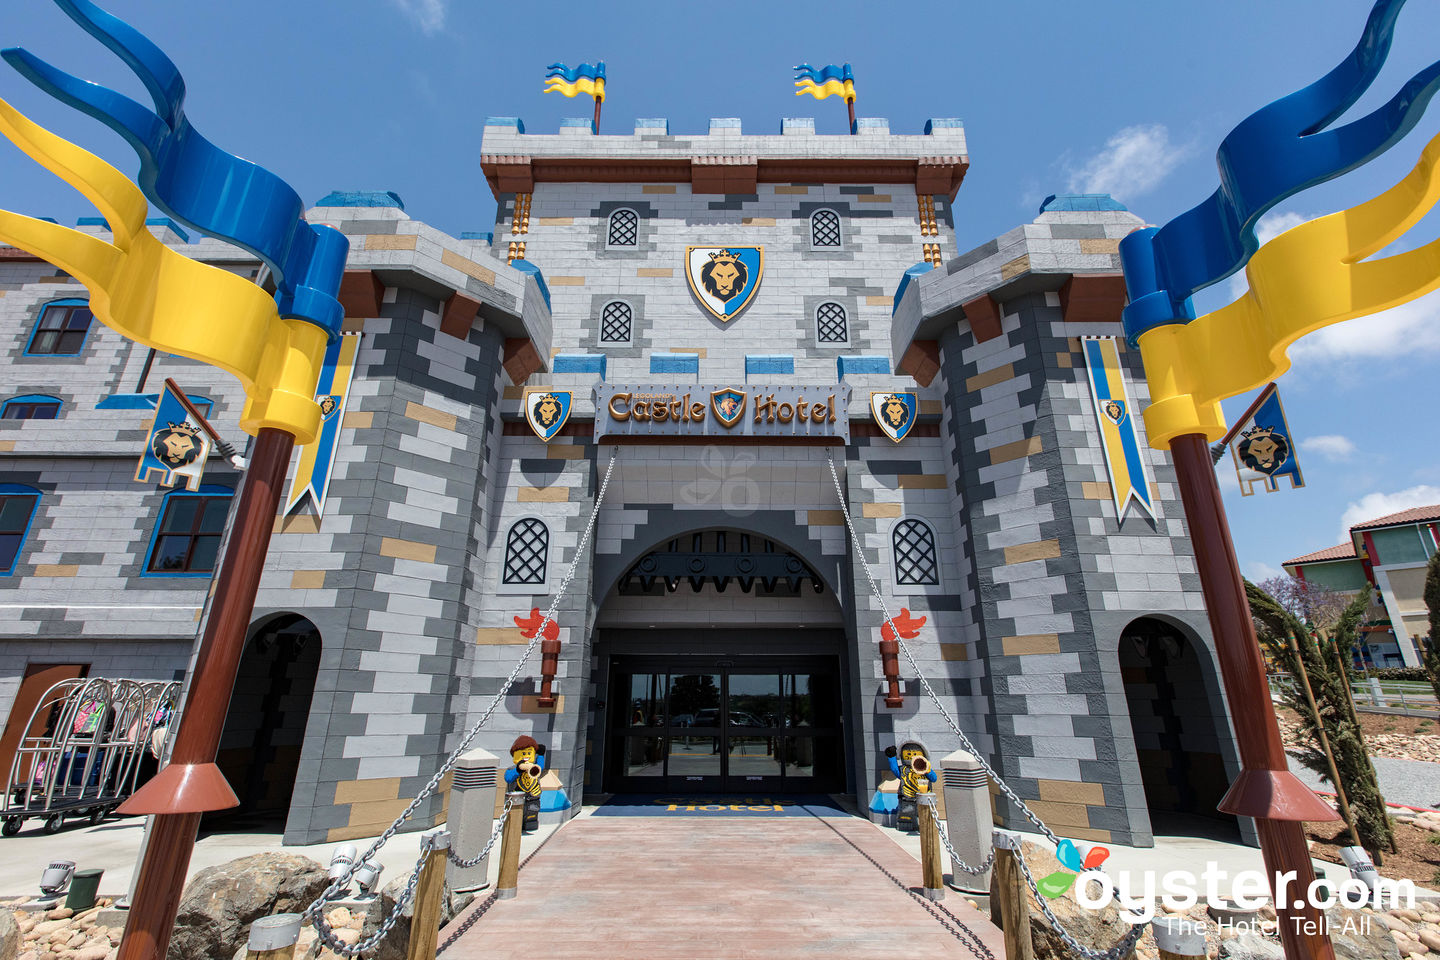 LEGOLAND Castle Hotel Review: What To Expect If You